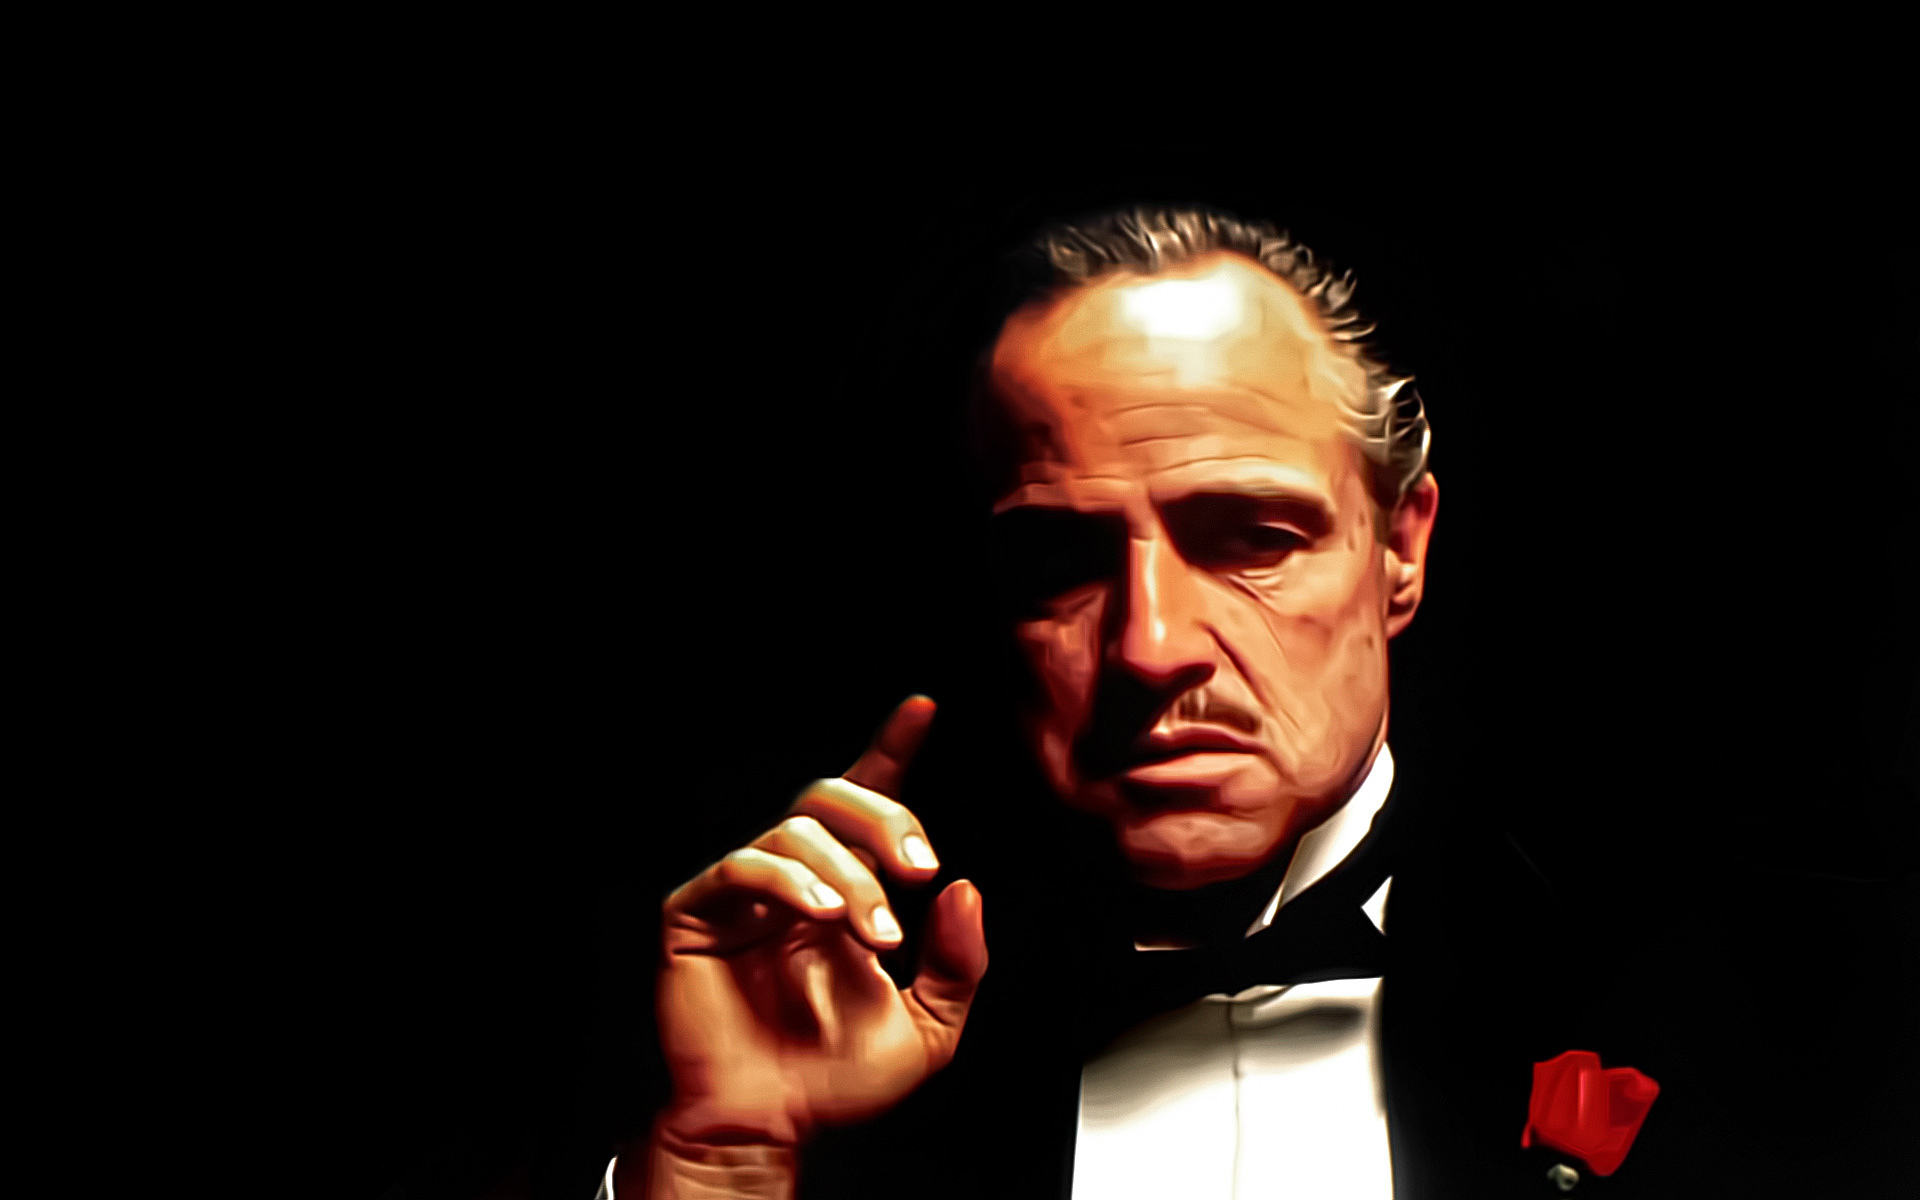 The Godfather Wallpapers (62+ images)